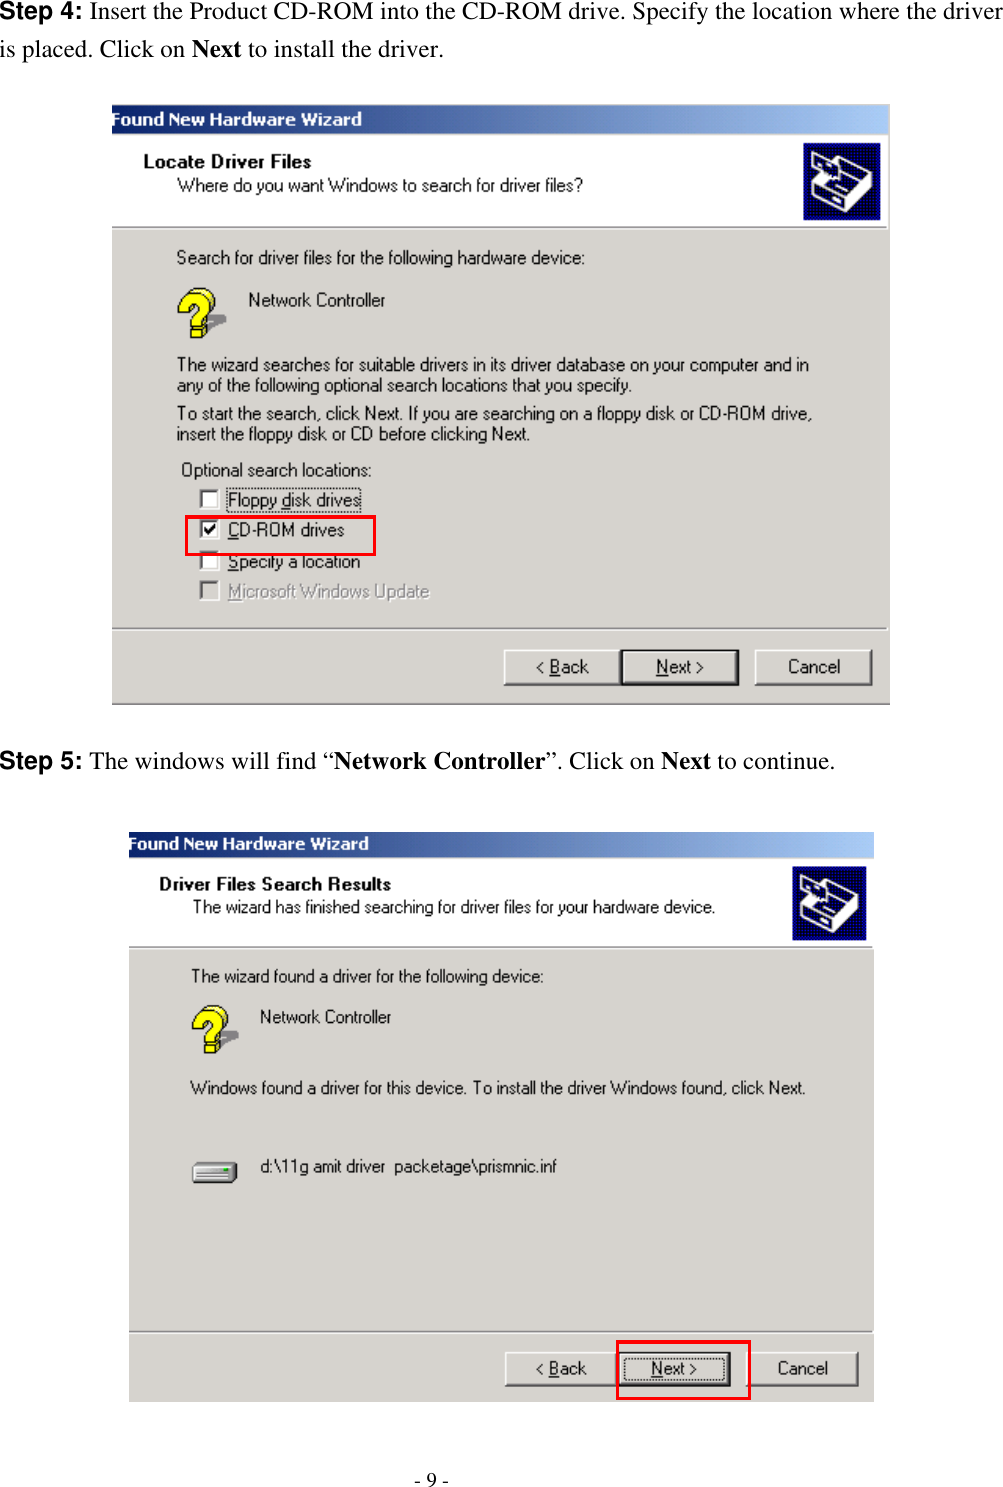    - 9 - Step 4: Insert the Product CD-ROM into the CD-ROM drive. Specify the location where the driver is placed. Click on Next to install the driver.    Step 5: The windows will find “Network Controller”. Click on Next to continue.   